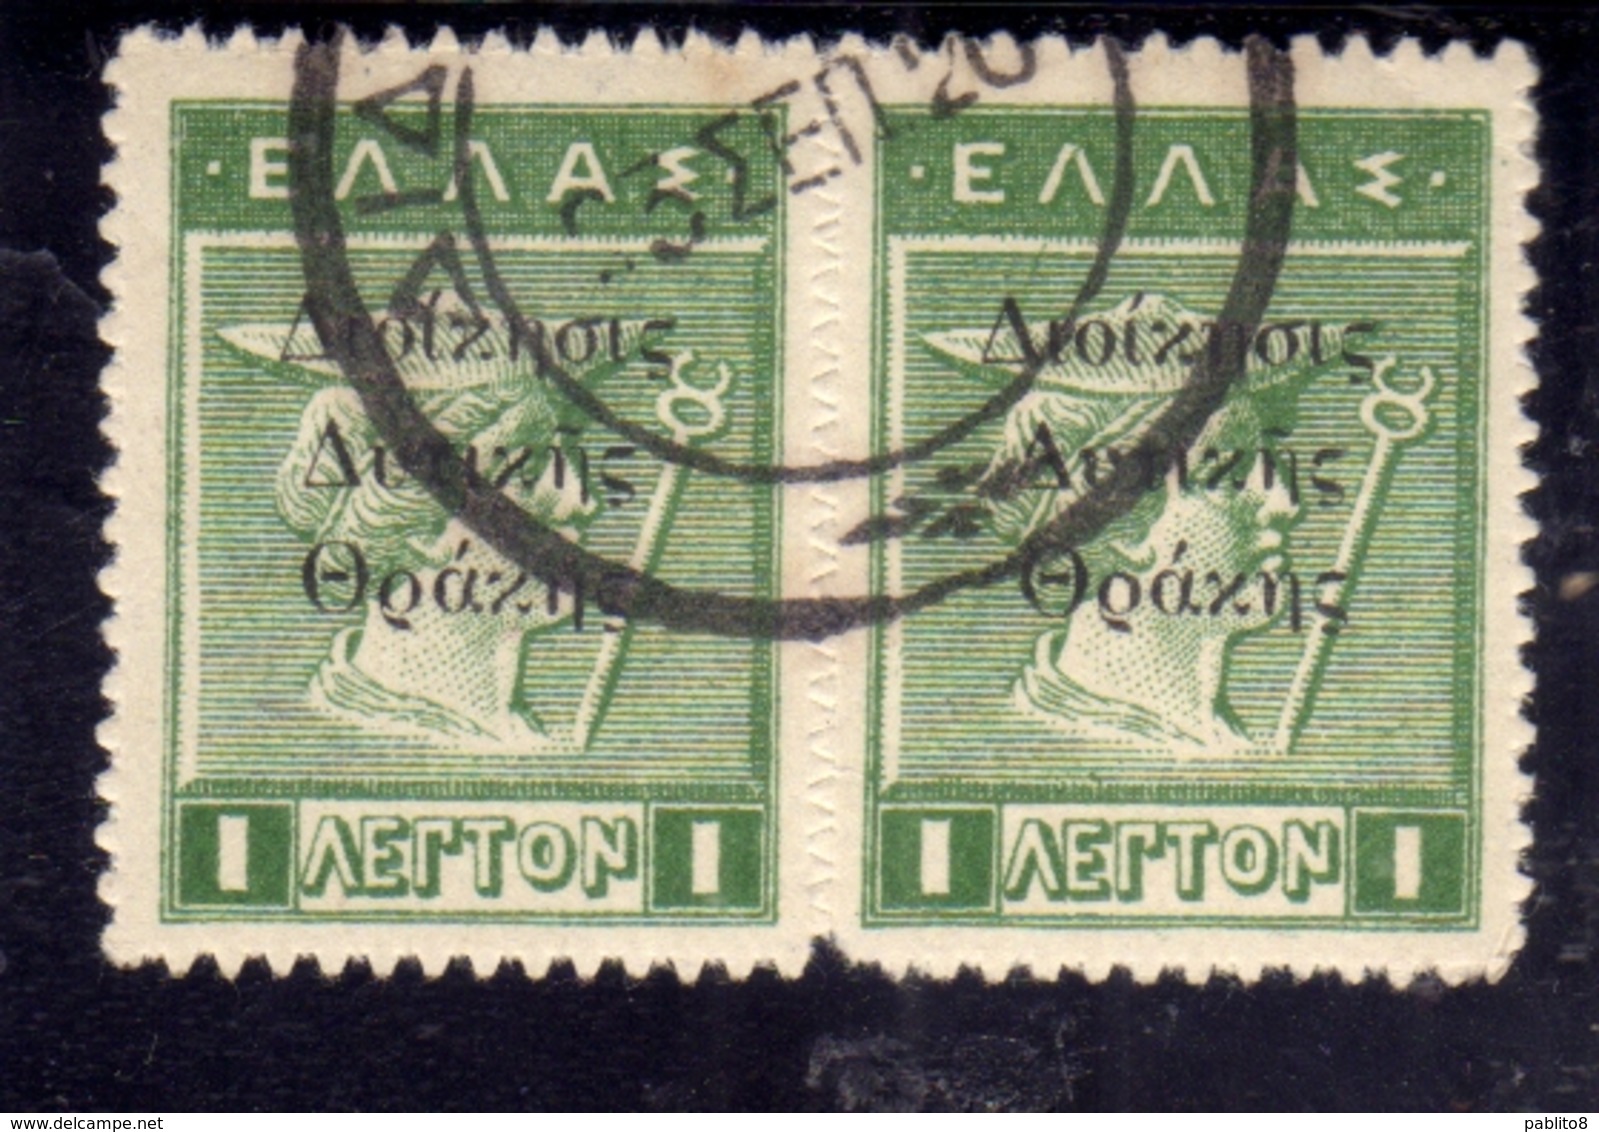 GREECE GRECIA HELLAS THRACE TRACIA 1920 GREEK STAMPS OCCUPATION OVERPRINTED PAIR LEPTA 1l USED USATO OBLITERE' - Thrace